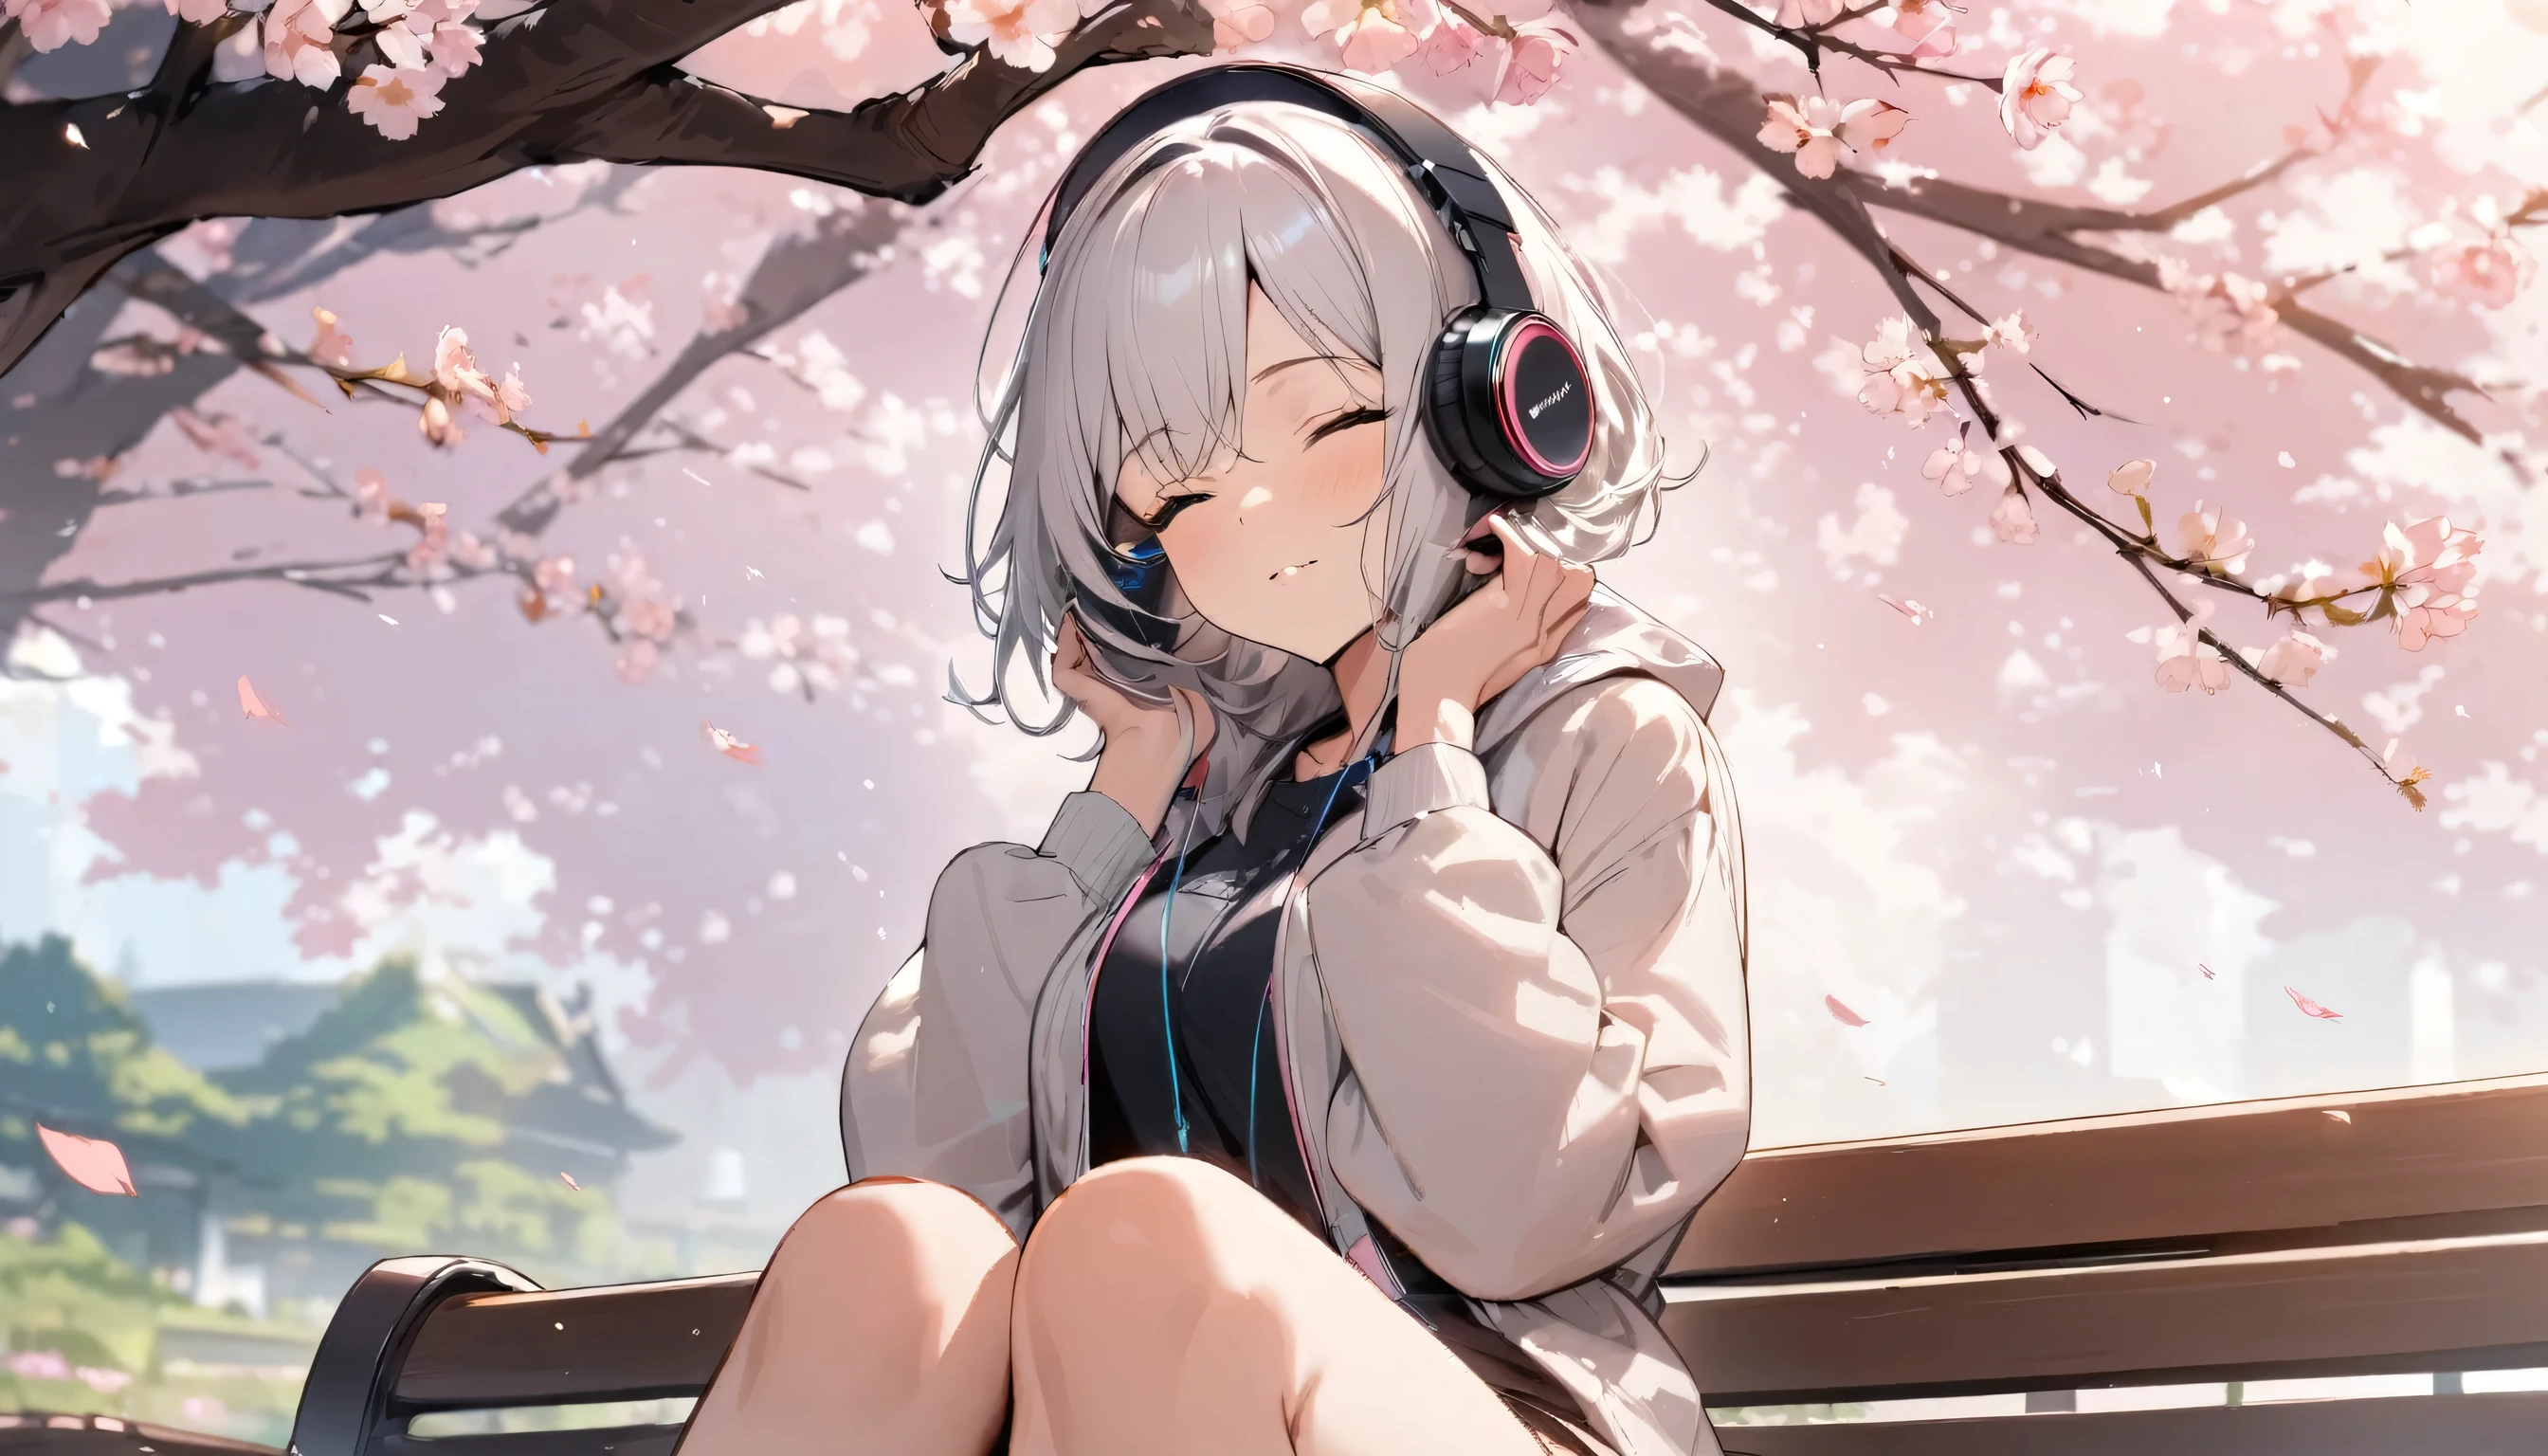 ((best quality)), ((masterpiece)), (detailed), perfect face, sitting under the cherry blossom tree, listening to music, One woman, wearing headphones, eyes closed, wearing underwear, underwear is transparent, sitting on a bench